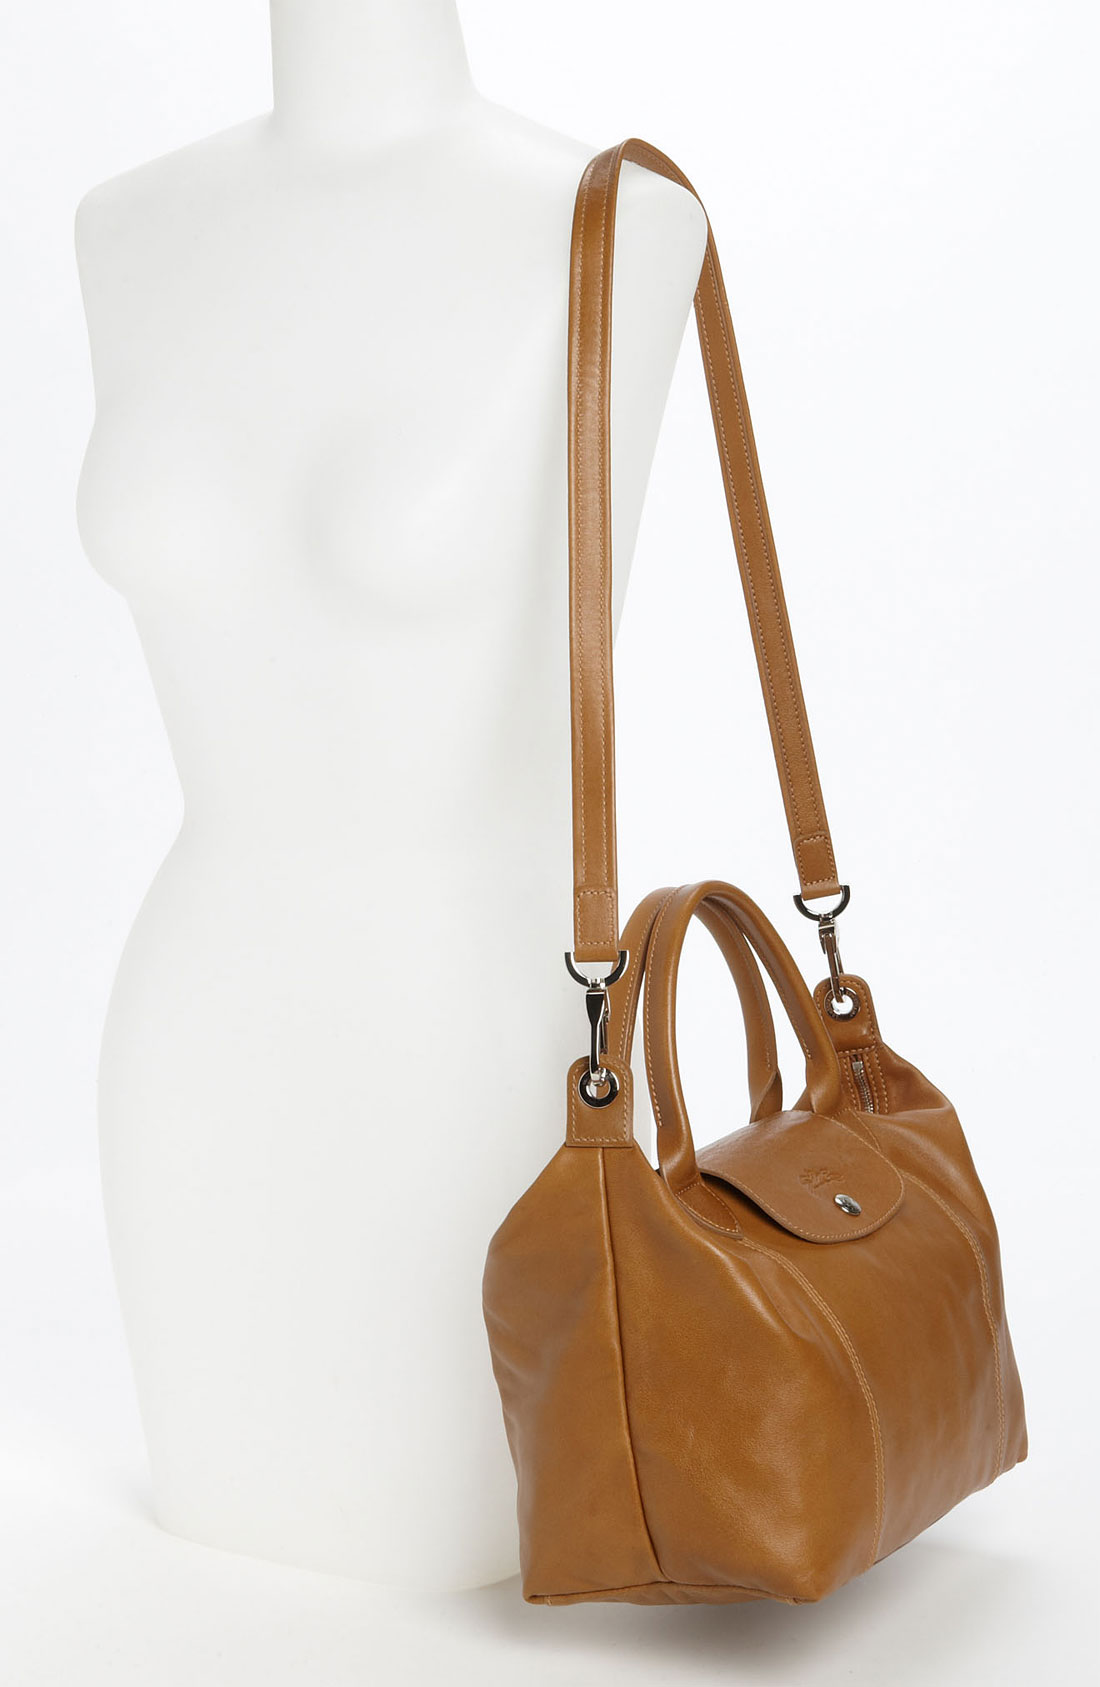 Longchamp Le Pliage Cuir Large Leather Tote Bags | The Art of Mike ...